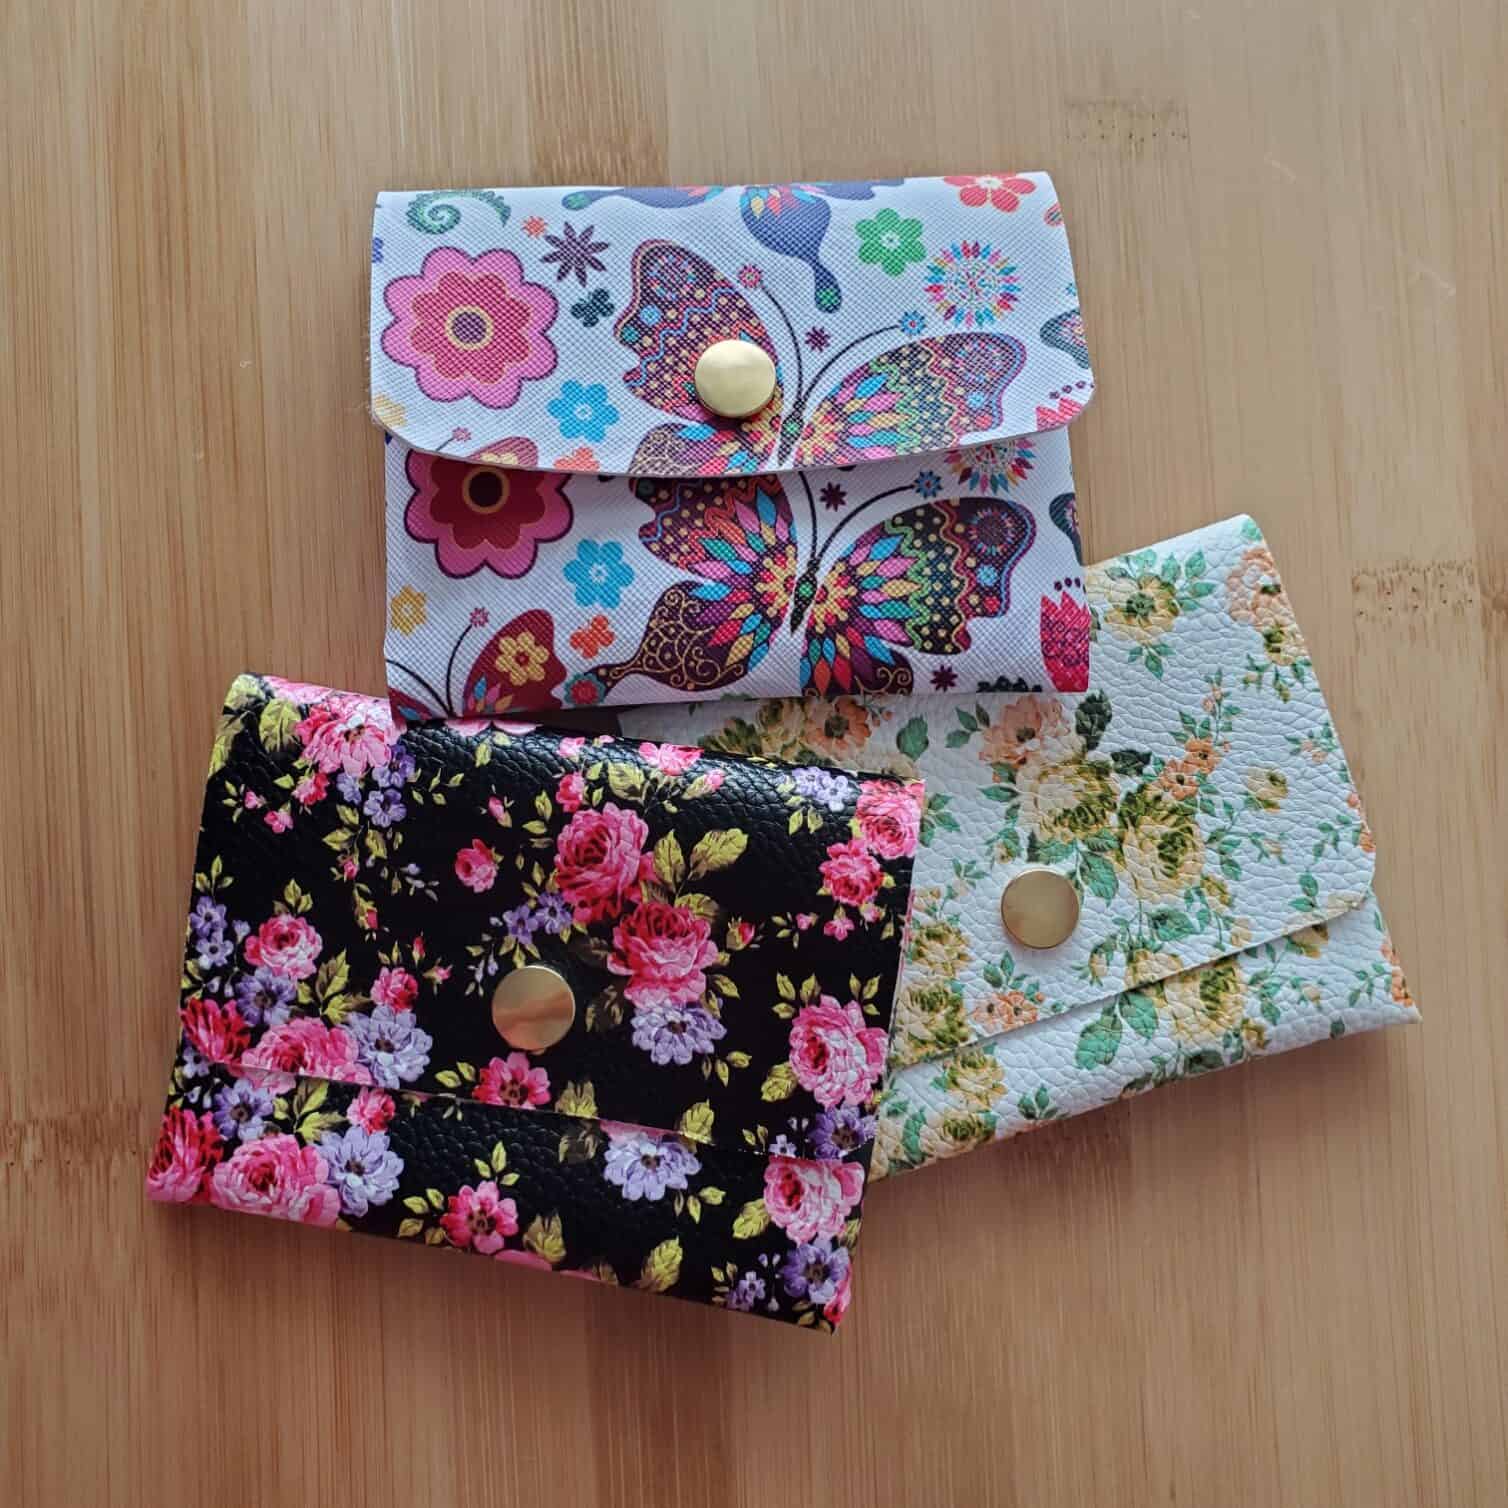 Small Womens Change Wallet Coin Purse Leather Zipper Card Holder Clutch  Keychain | eBay